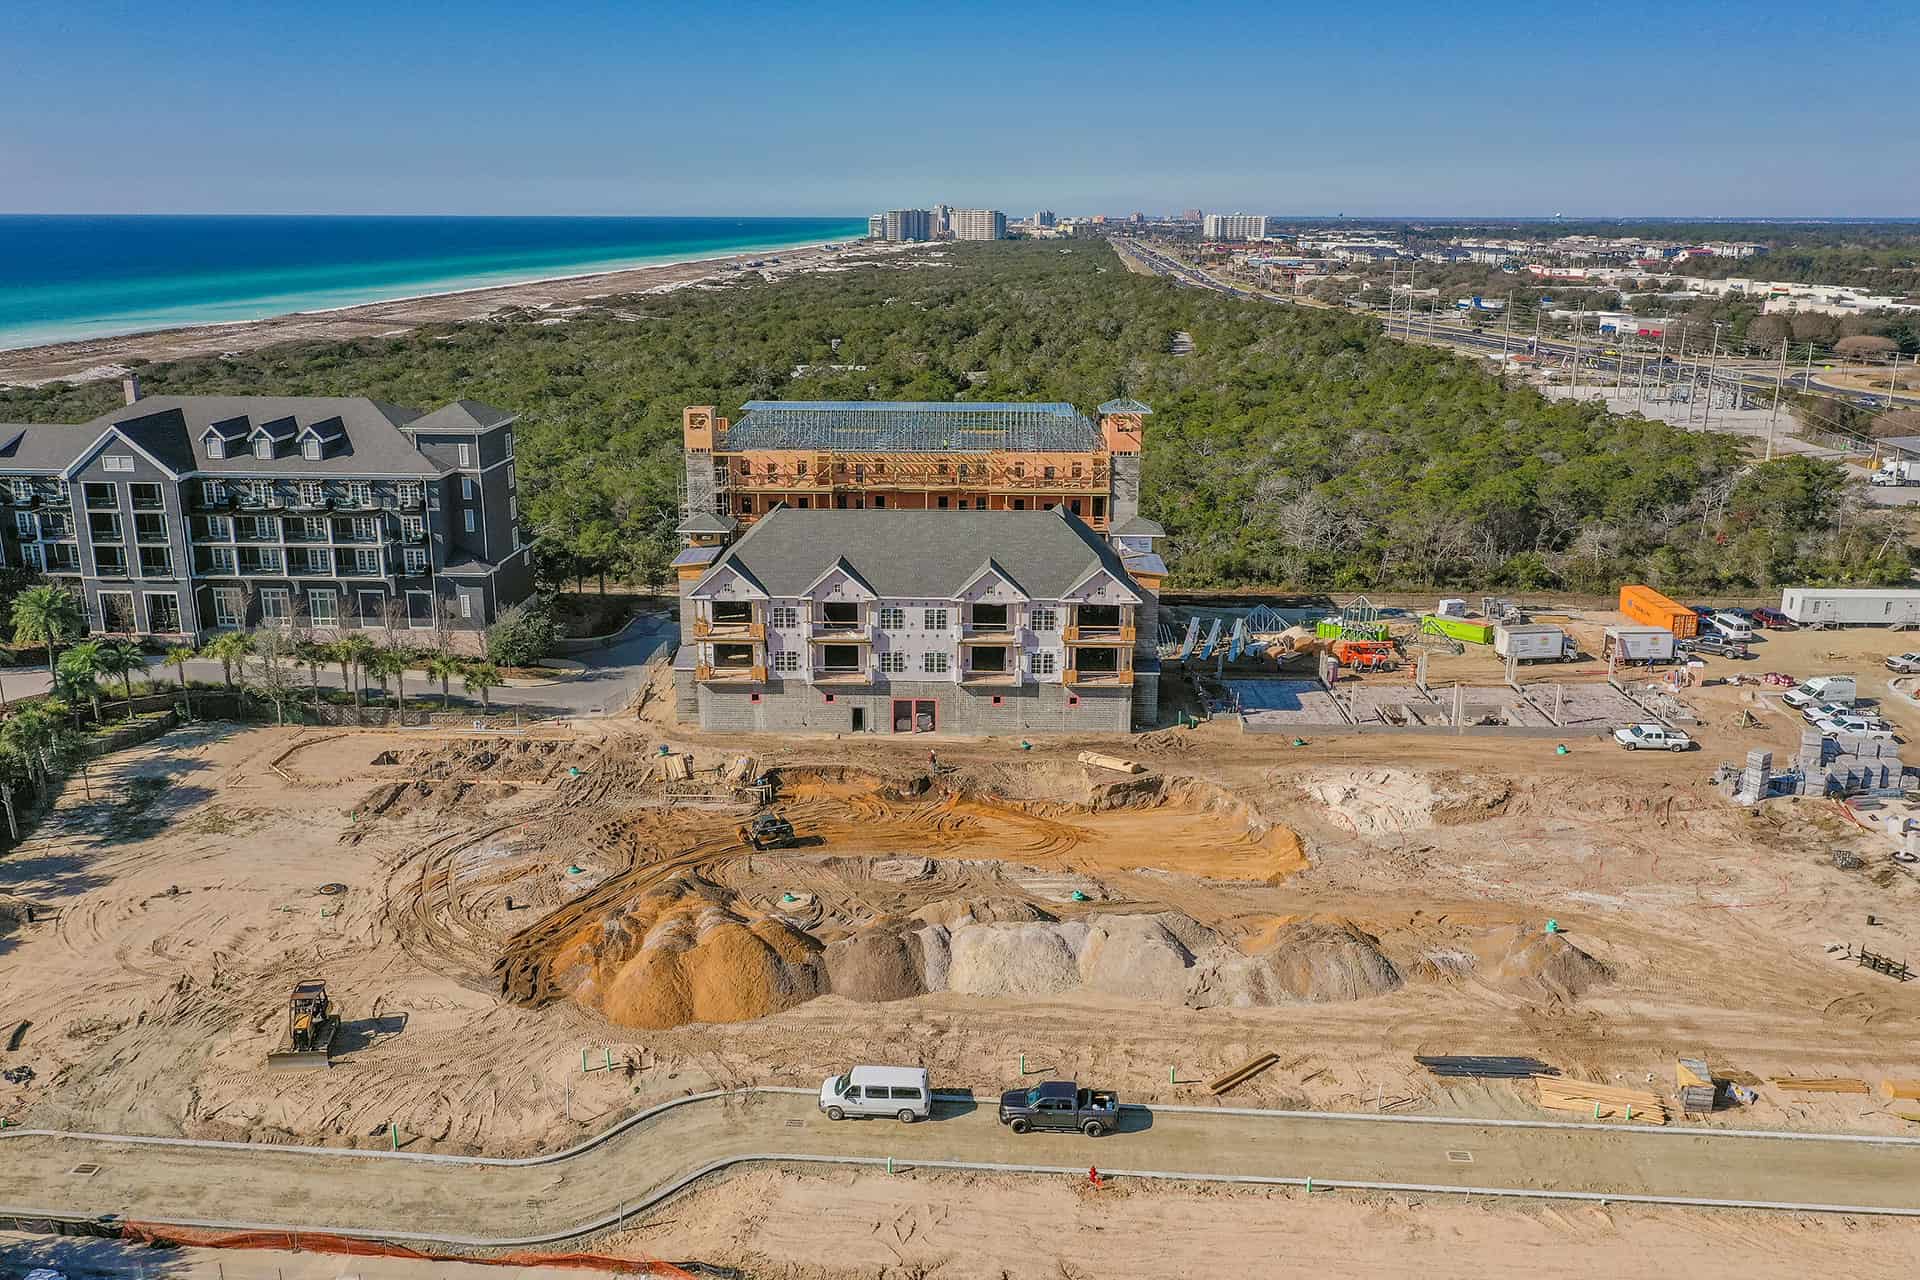 Parkside_at_Henderson_Beach_Resort_January_2021 drone photo looking west